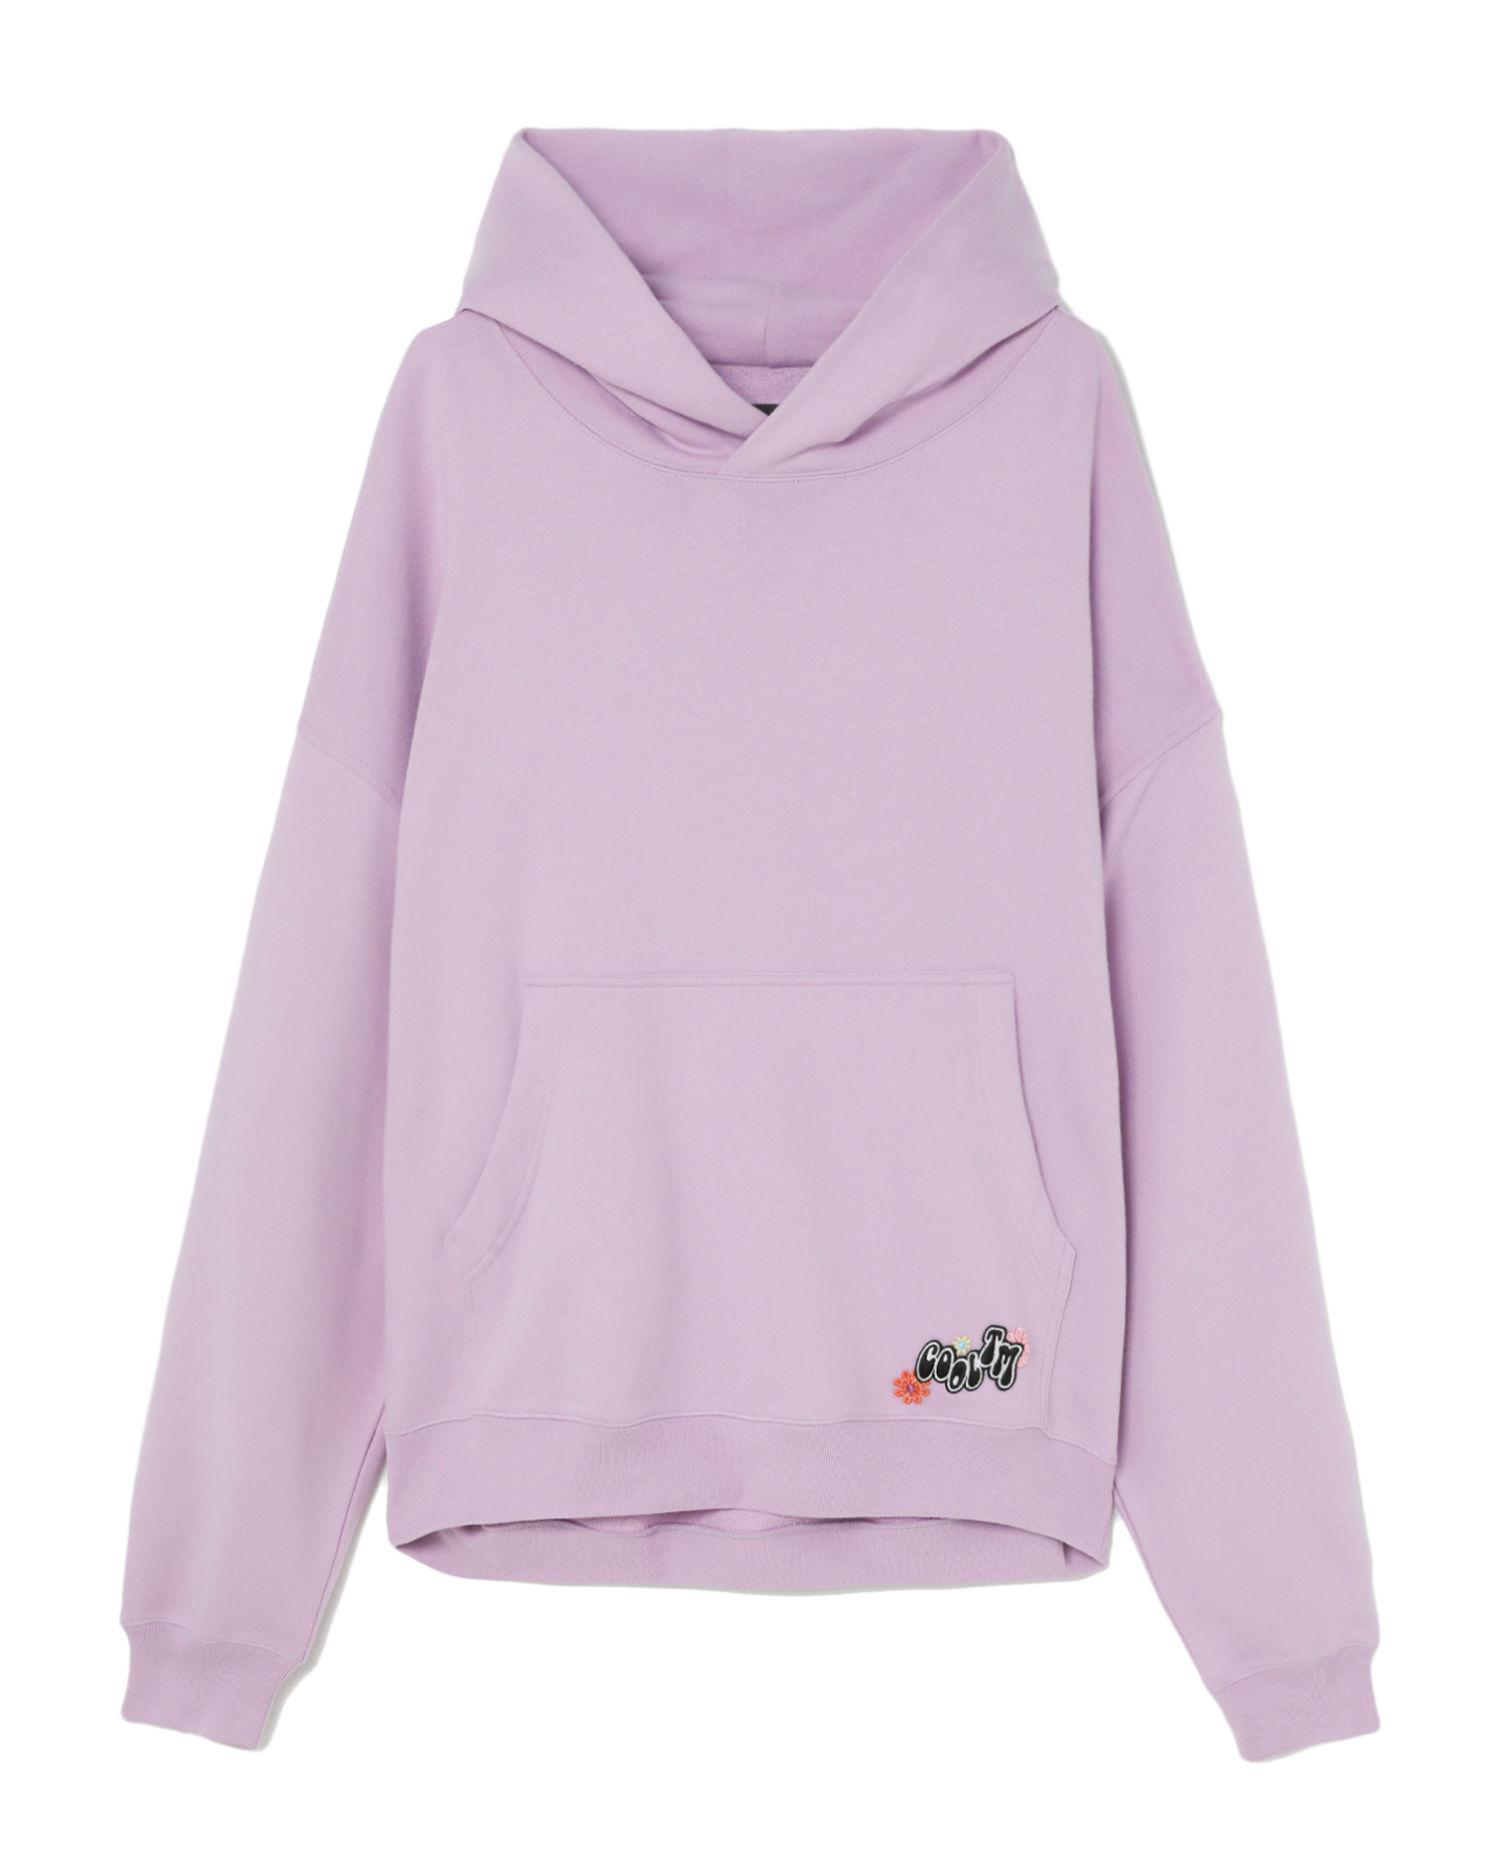 Oversized floral back embroidered hoodie by COOL T.M